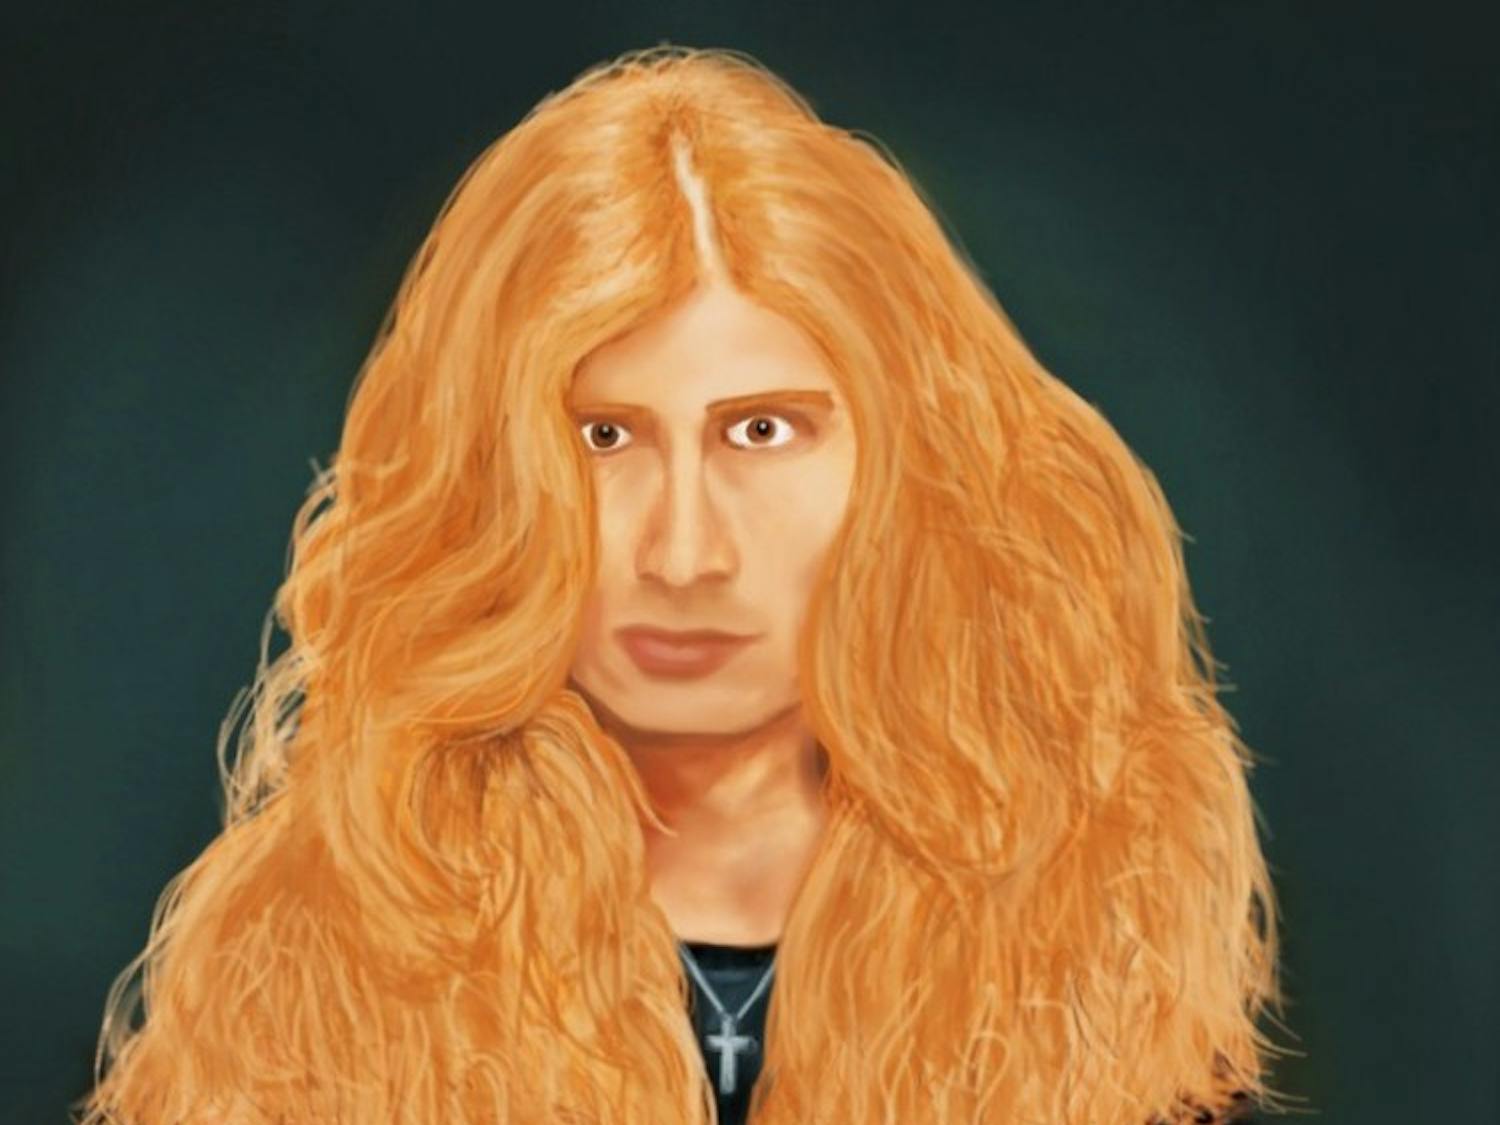 A Dave Mustaine painting created in Sketchbook Express. Photo by Alec Damiano.